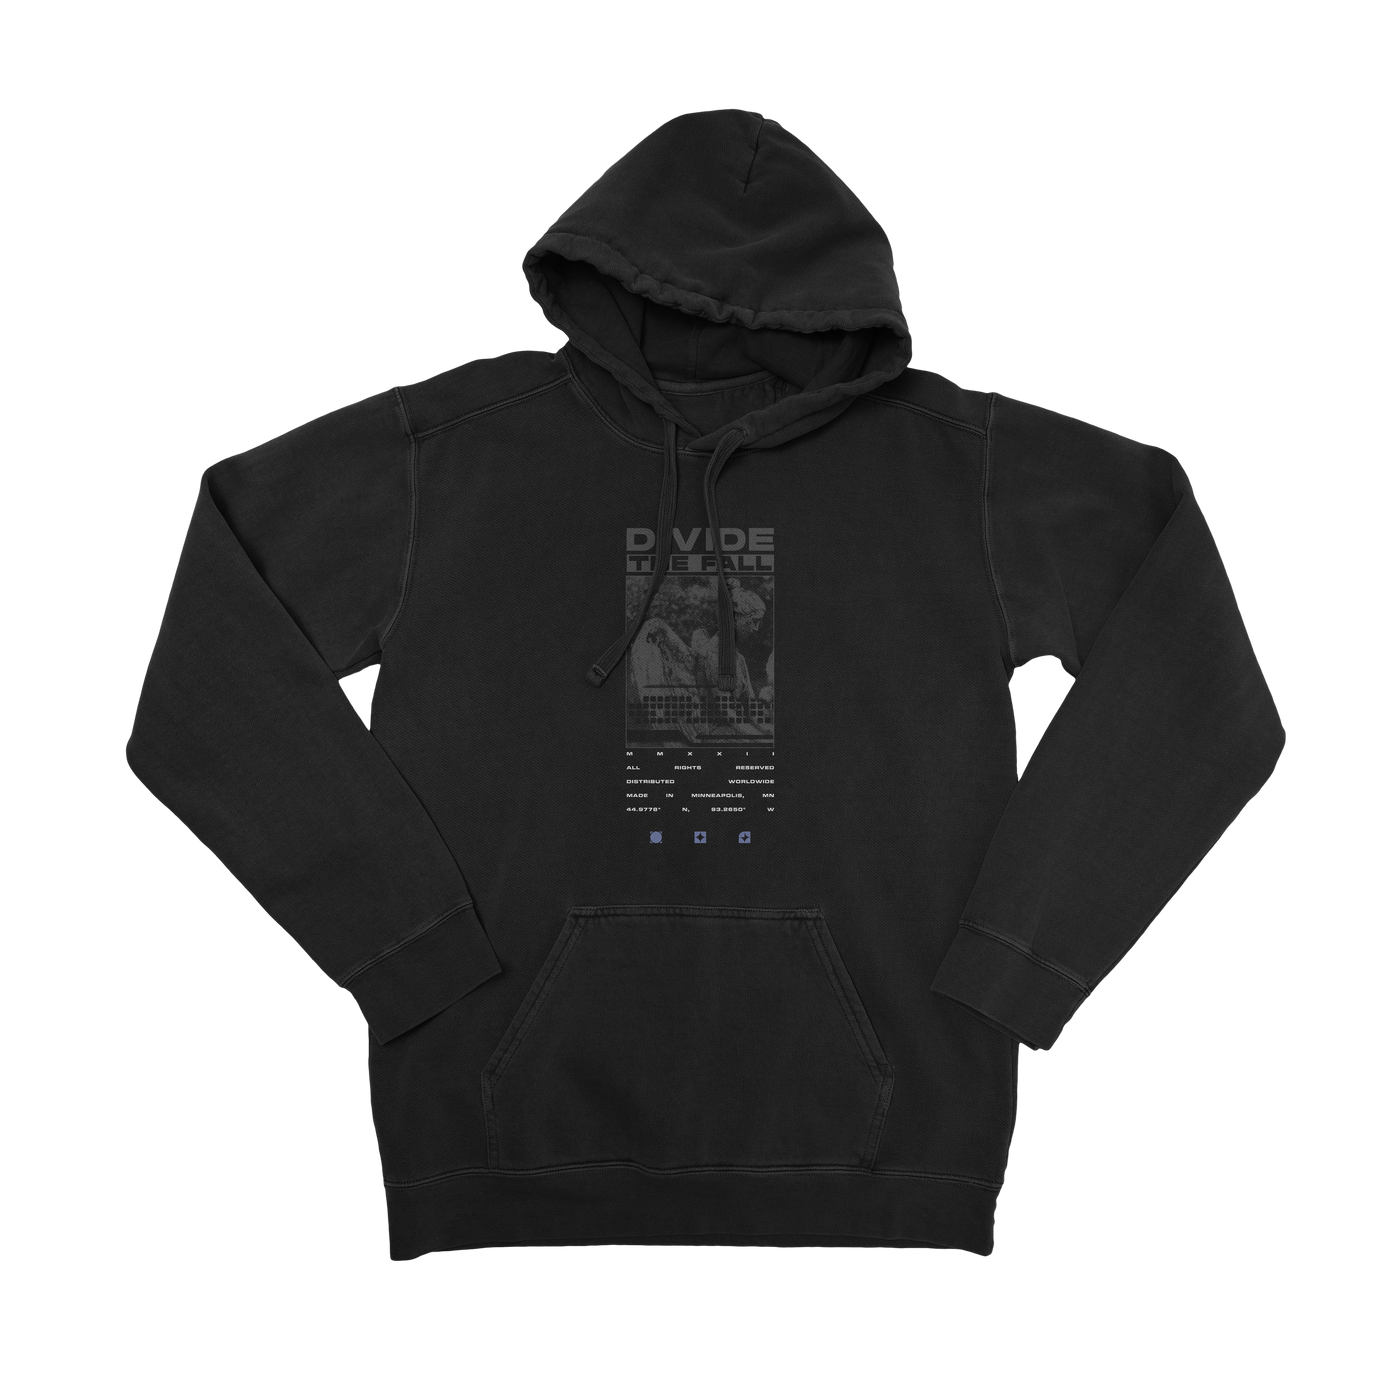 "Divide The Fall" Pullover Hoodie